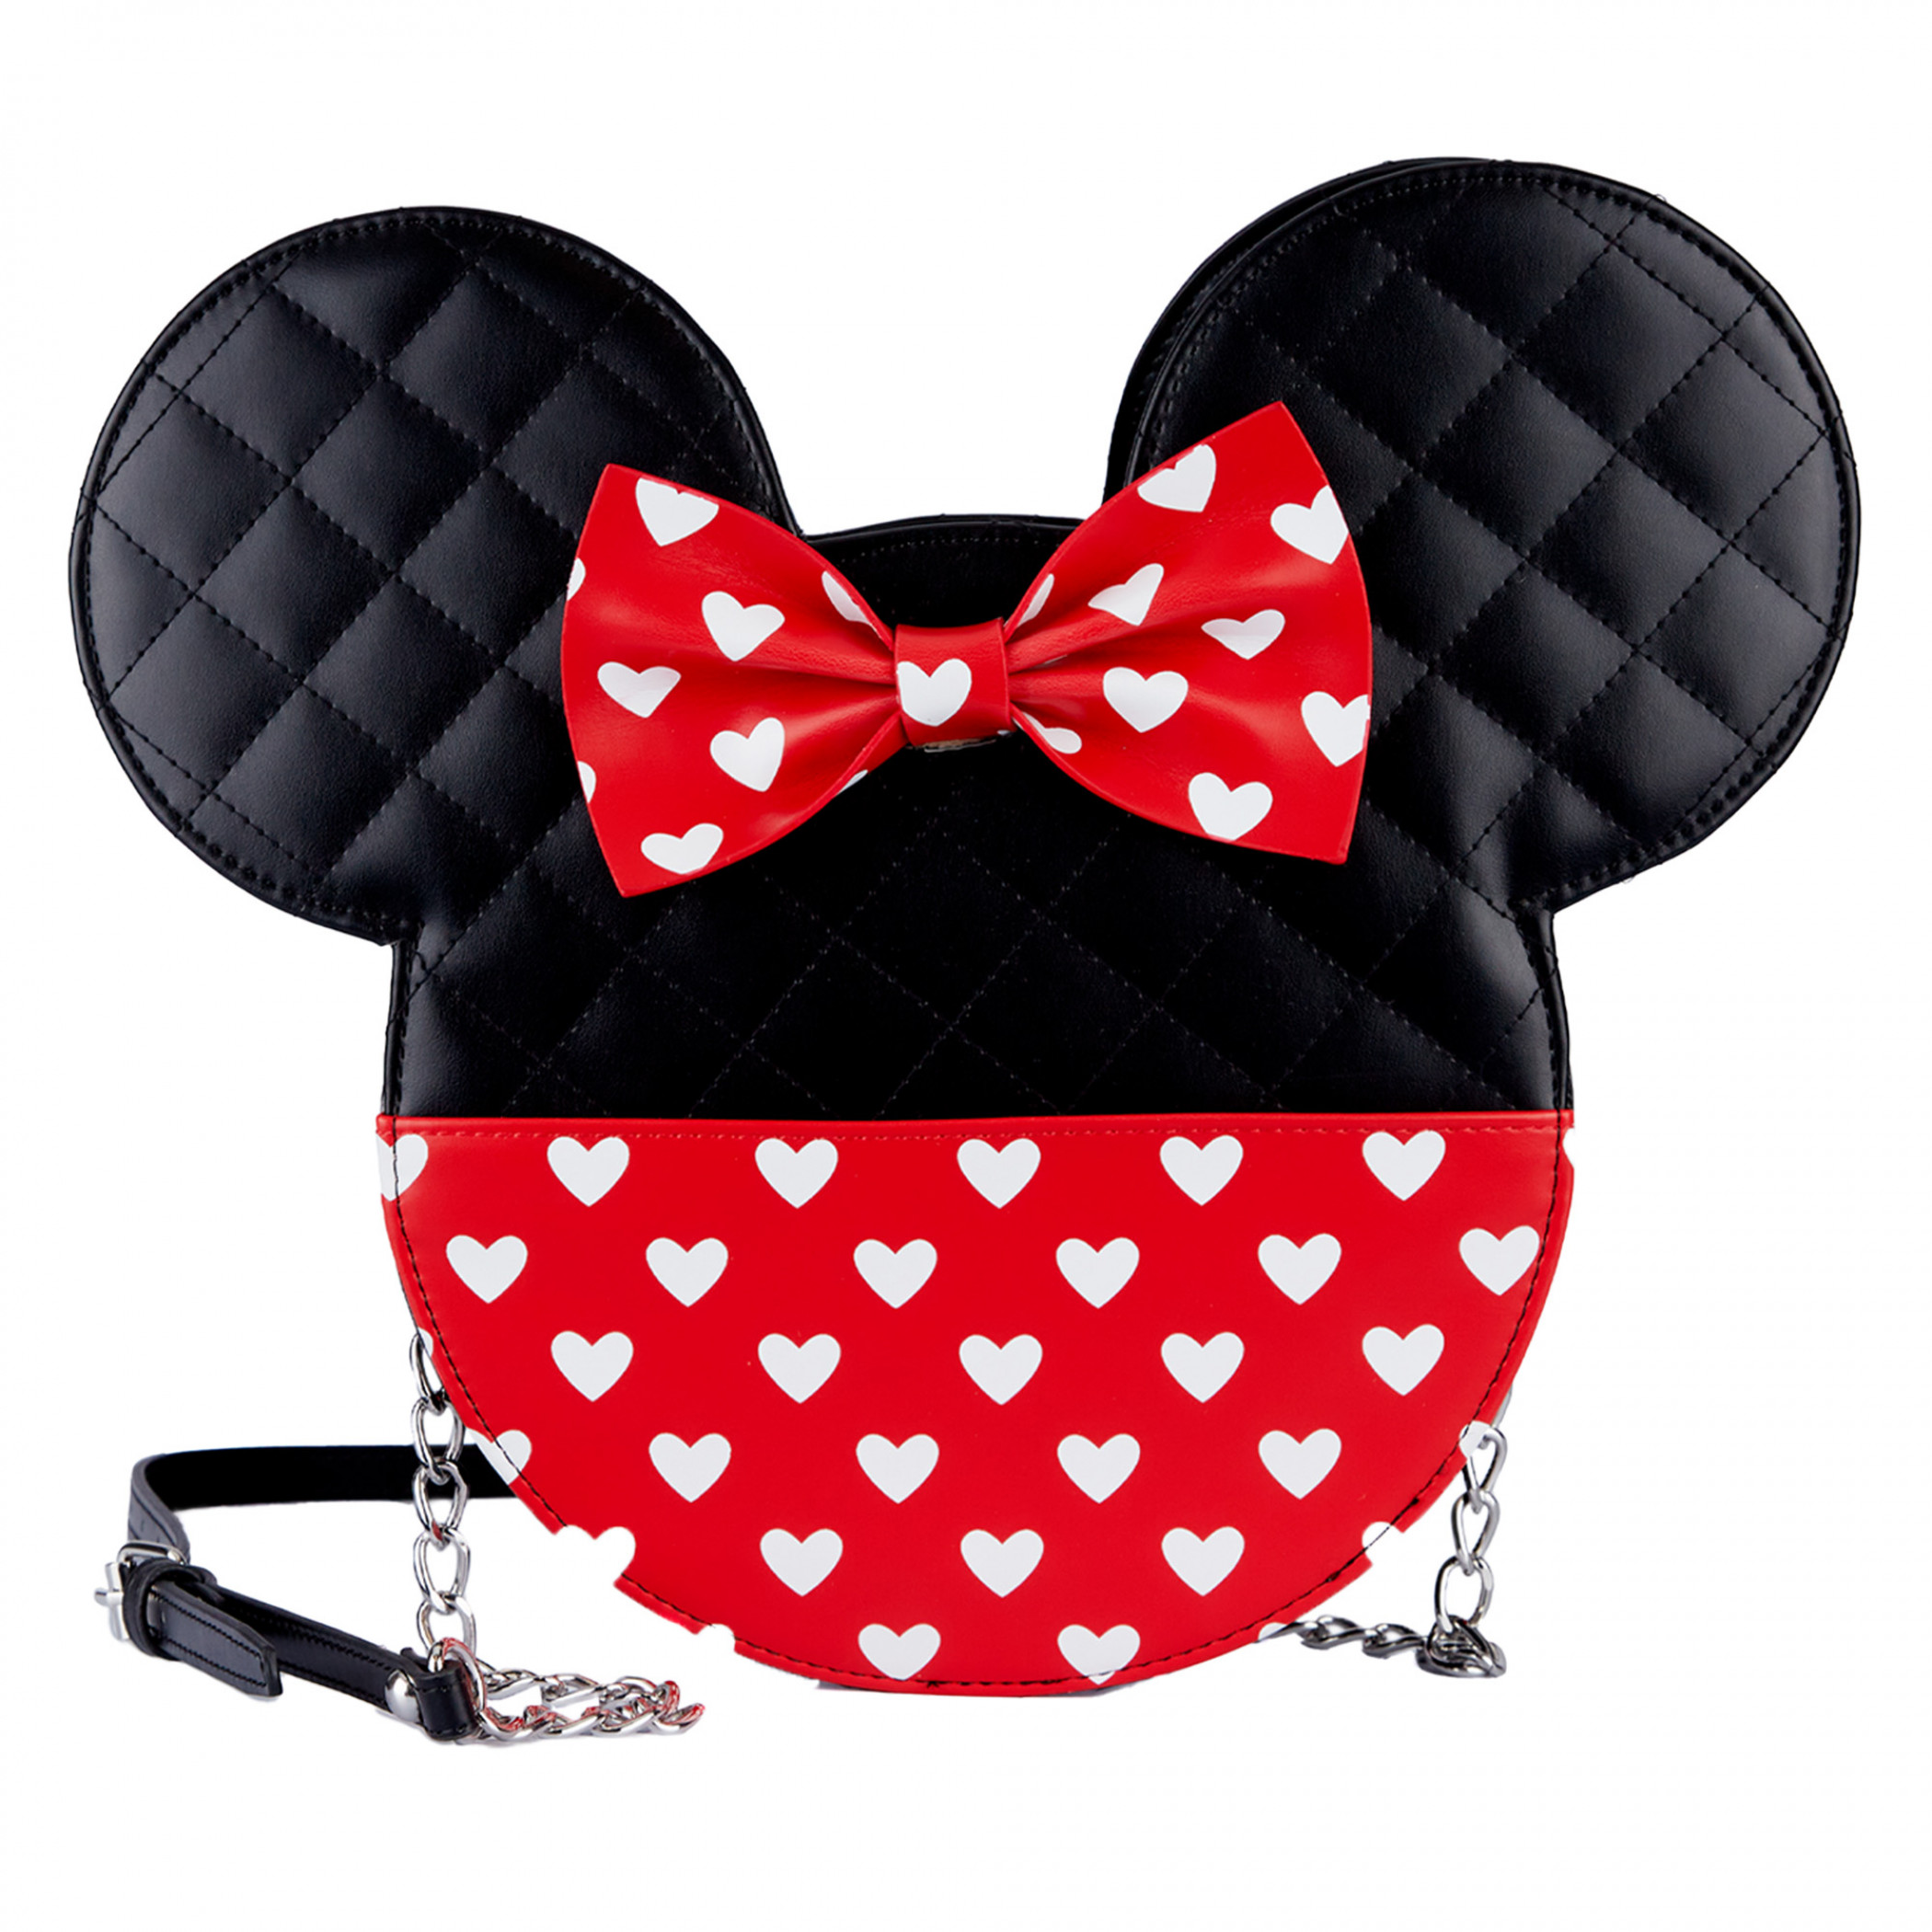 Loungefly Minnie Mouse Shoulder Bags for Women